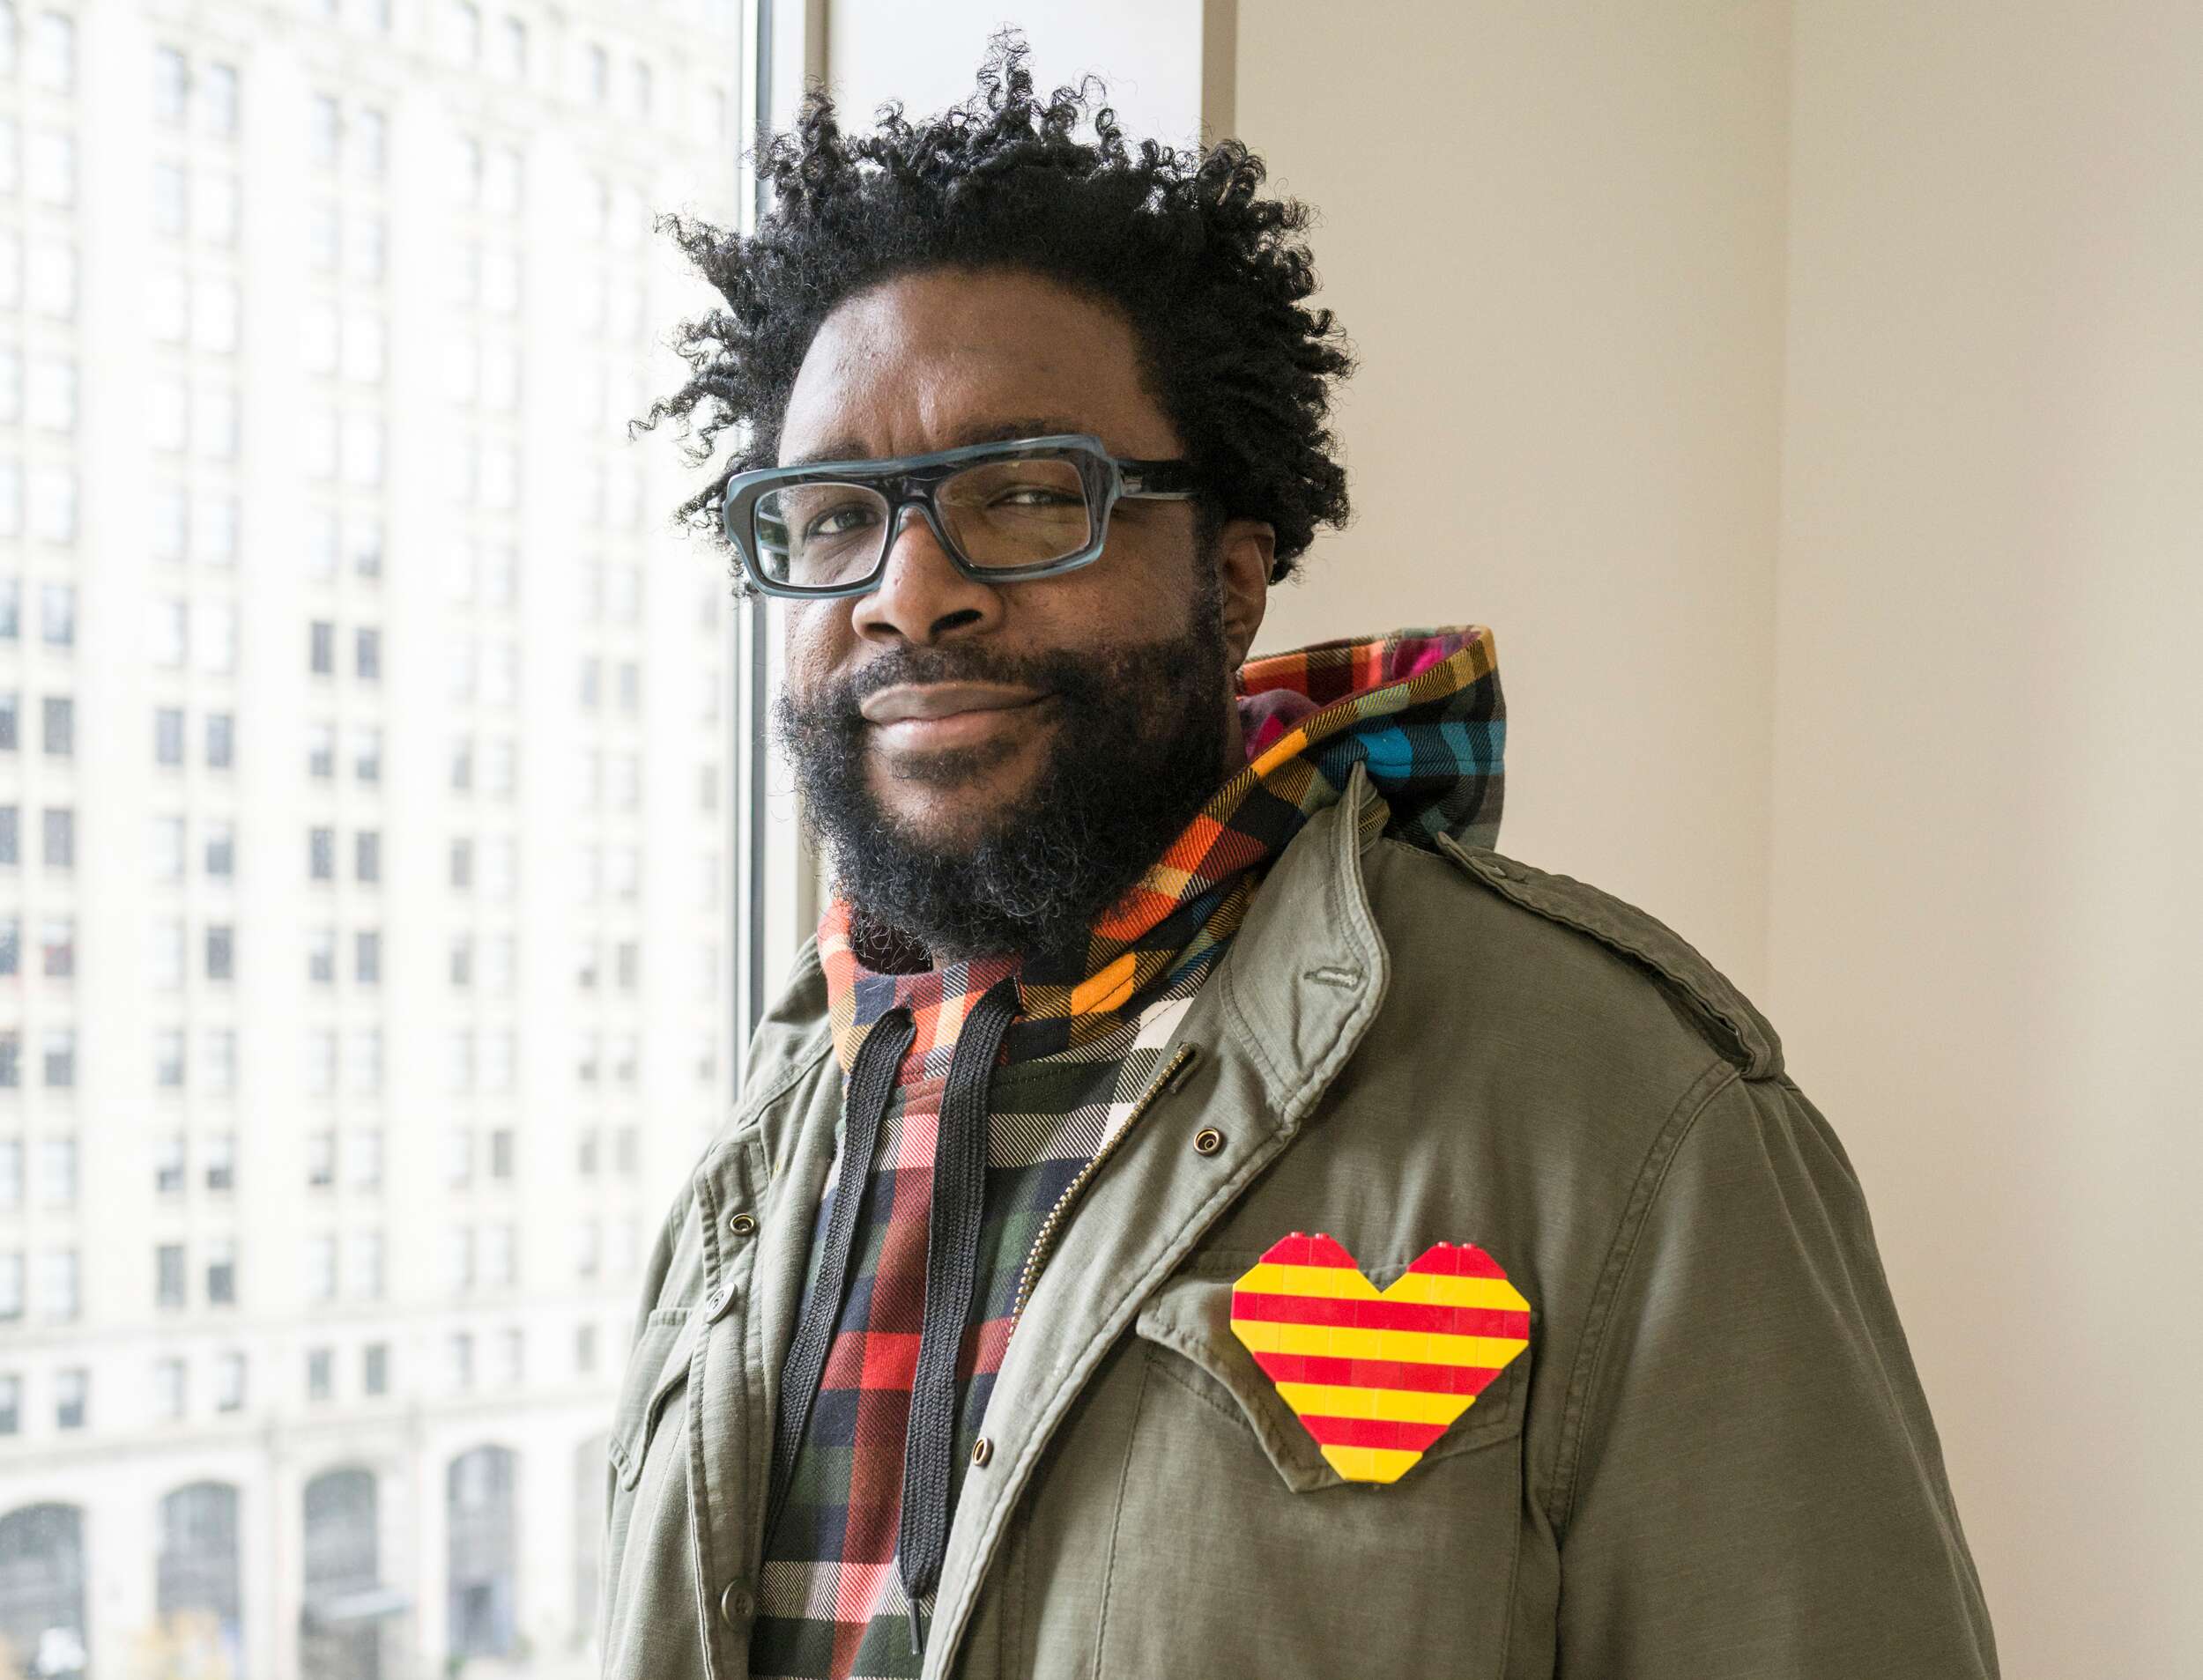 Questlove Celebrates The Addition Of "Jawn" To The Dictionary